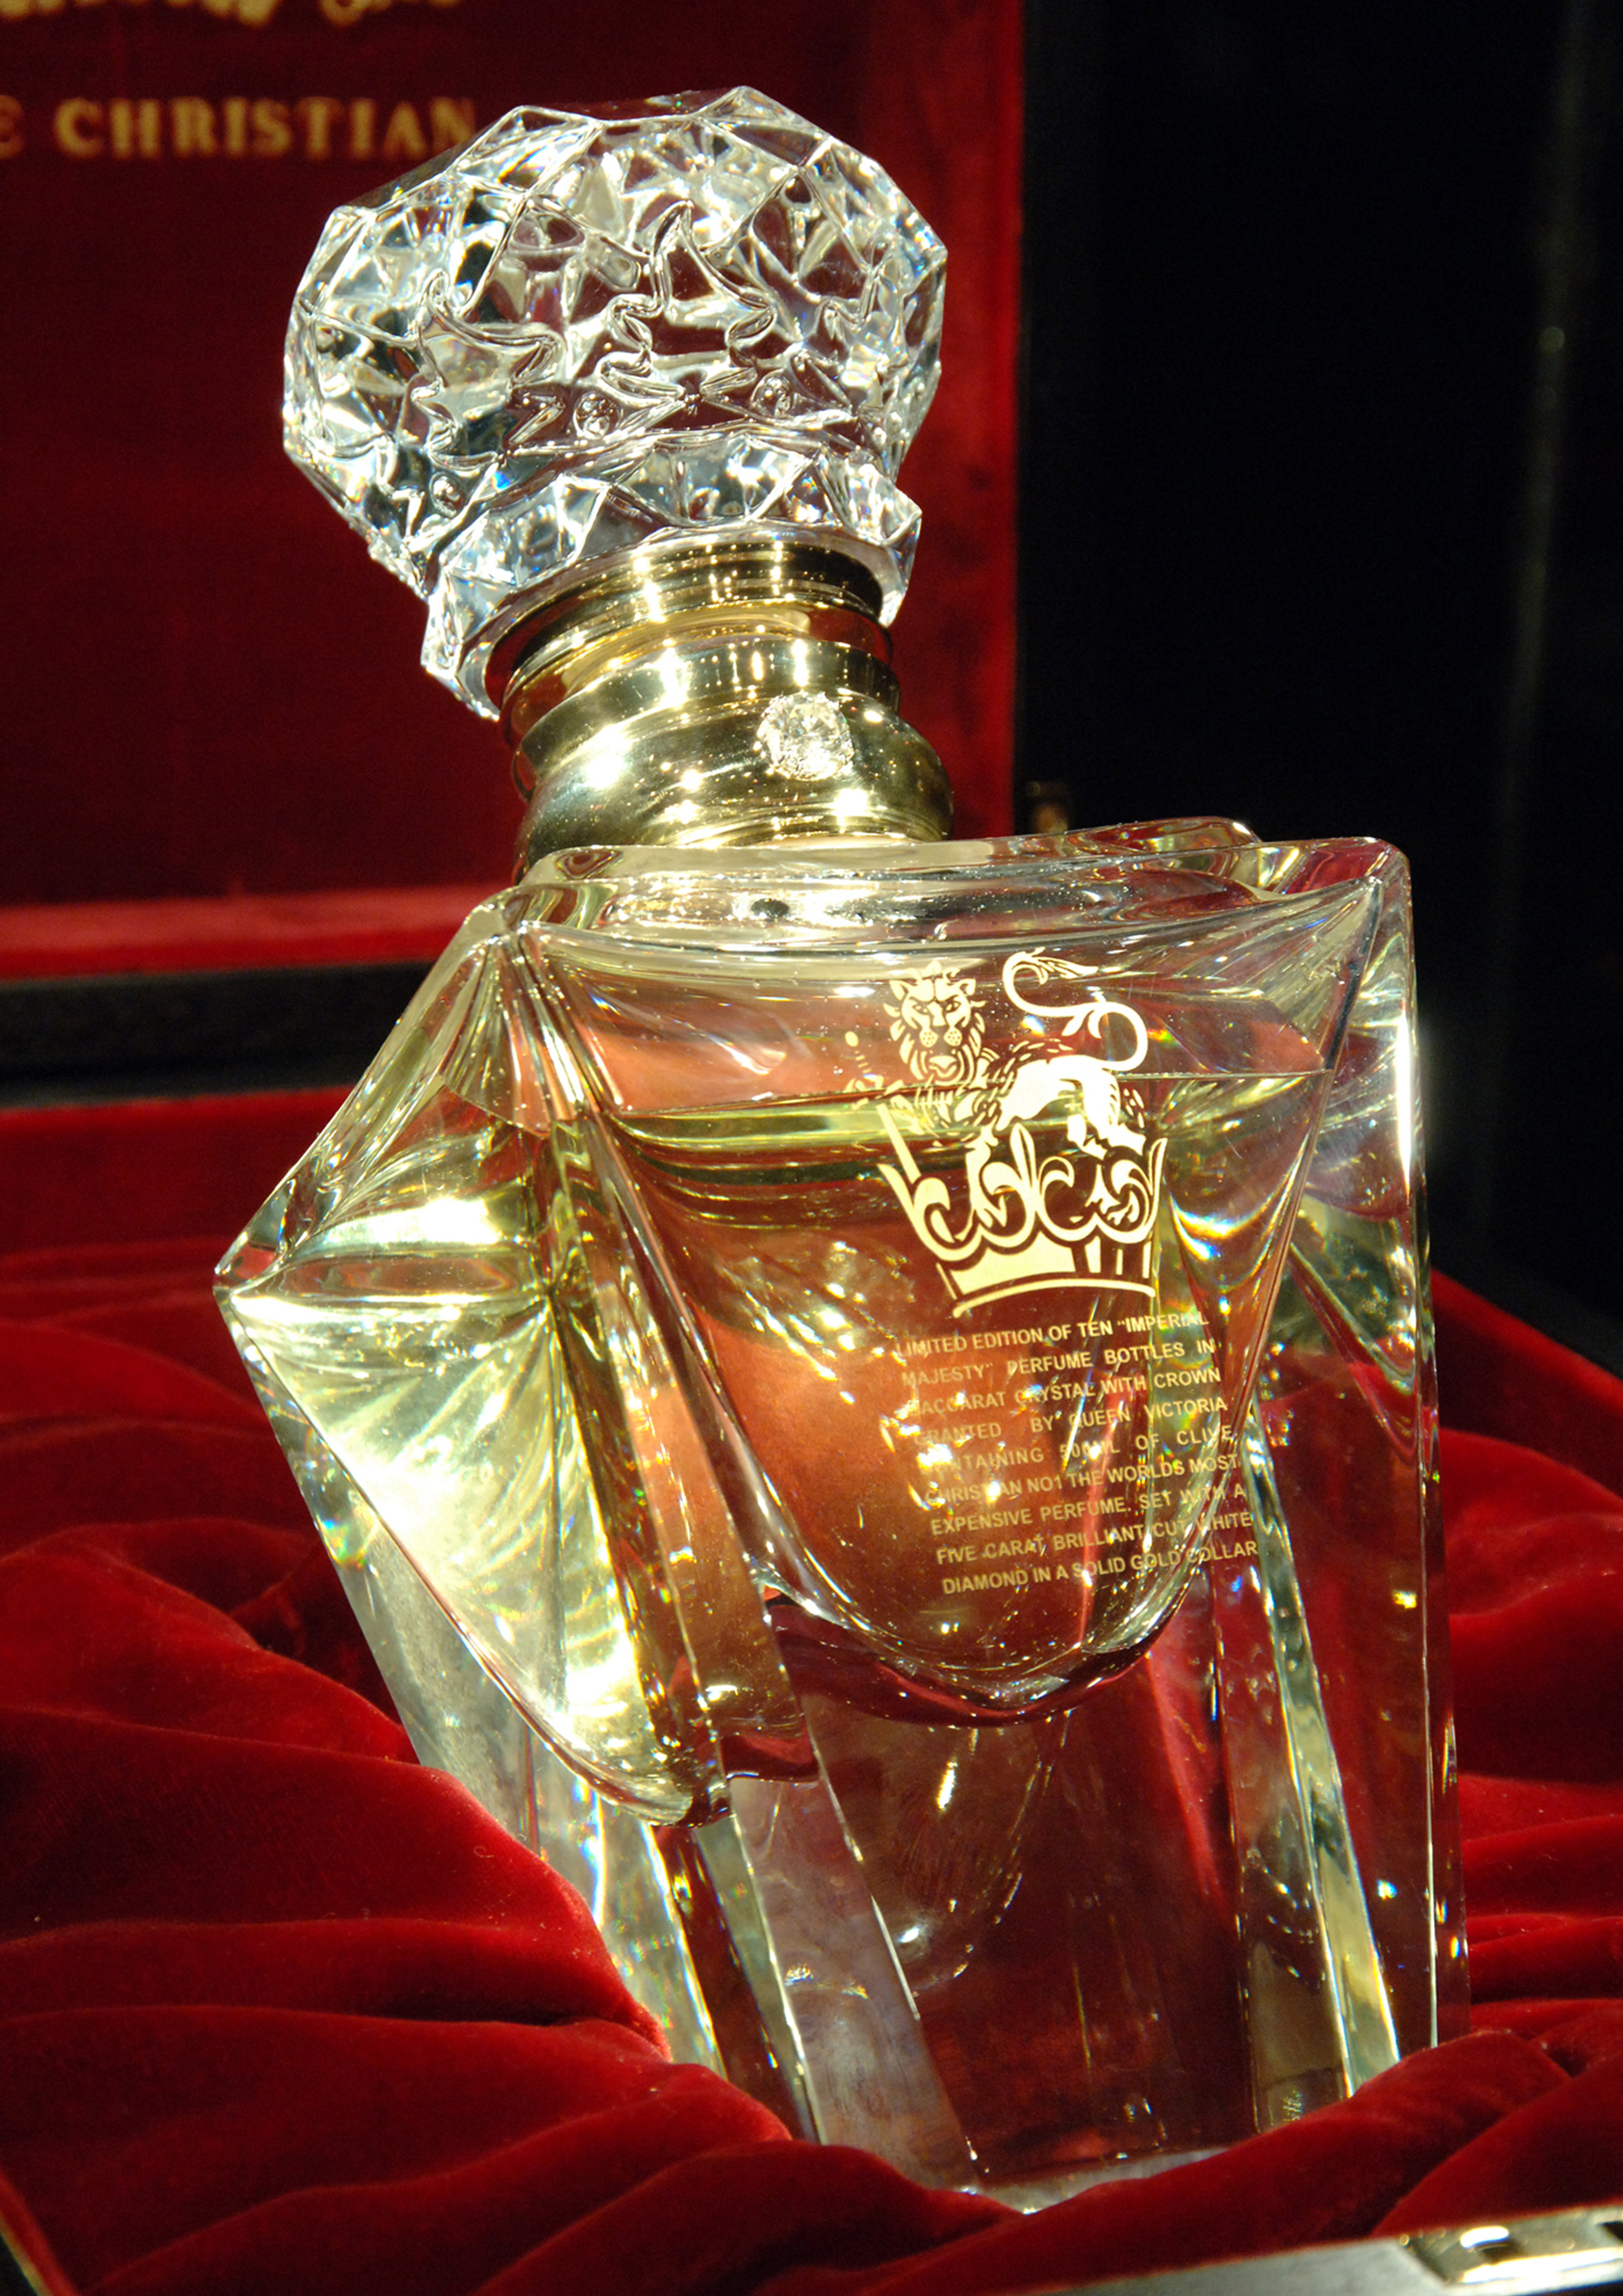 http://www.jewellerymag.ru/wp-content/uploads/2014/04/clive-christian-no-1-perfume-imperial-majesty-edition-closeup.jpg